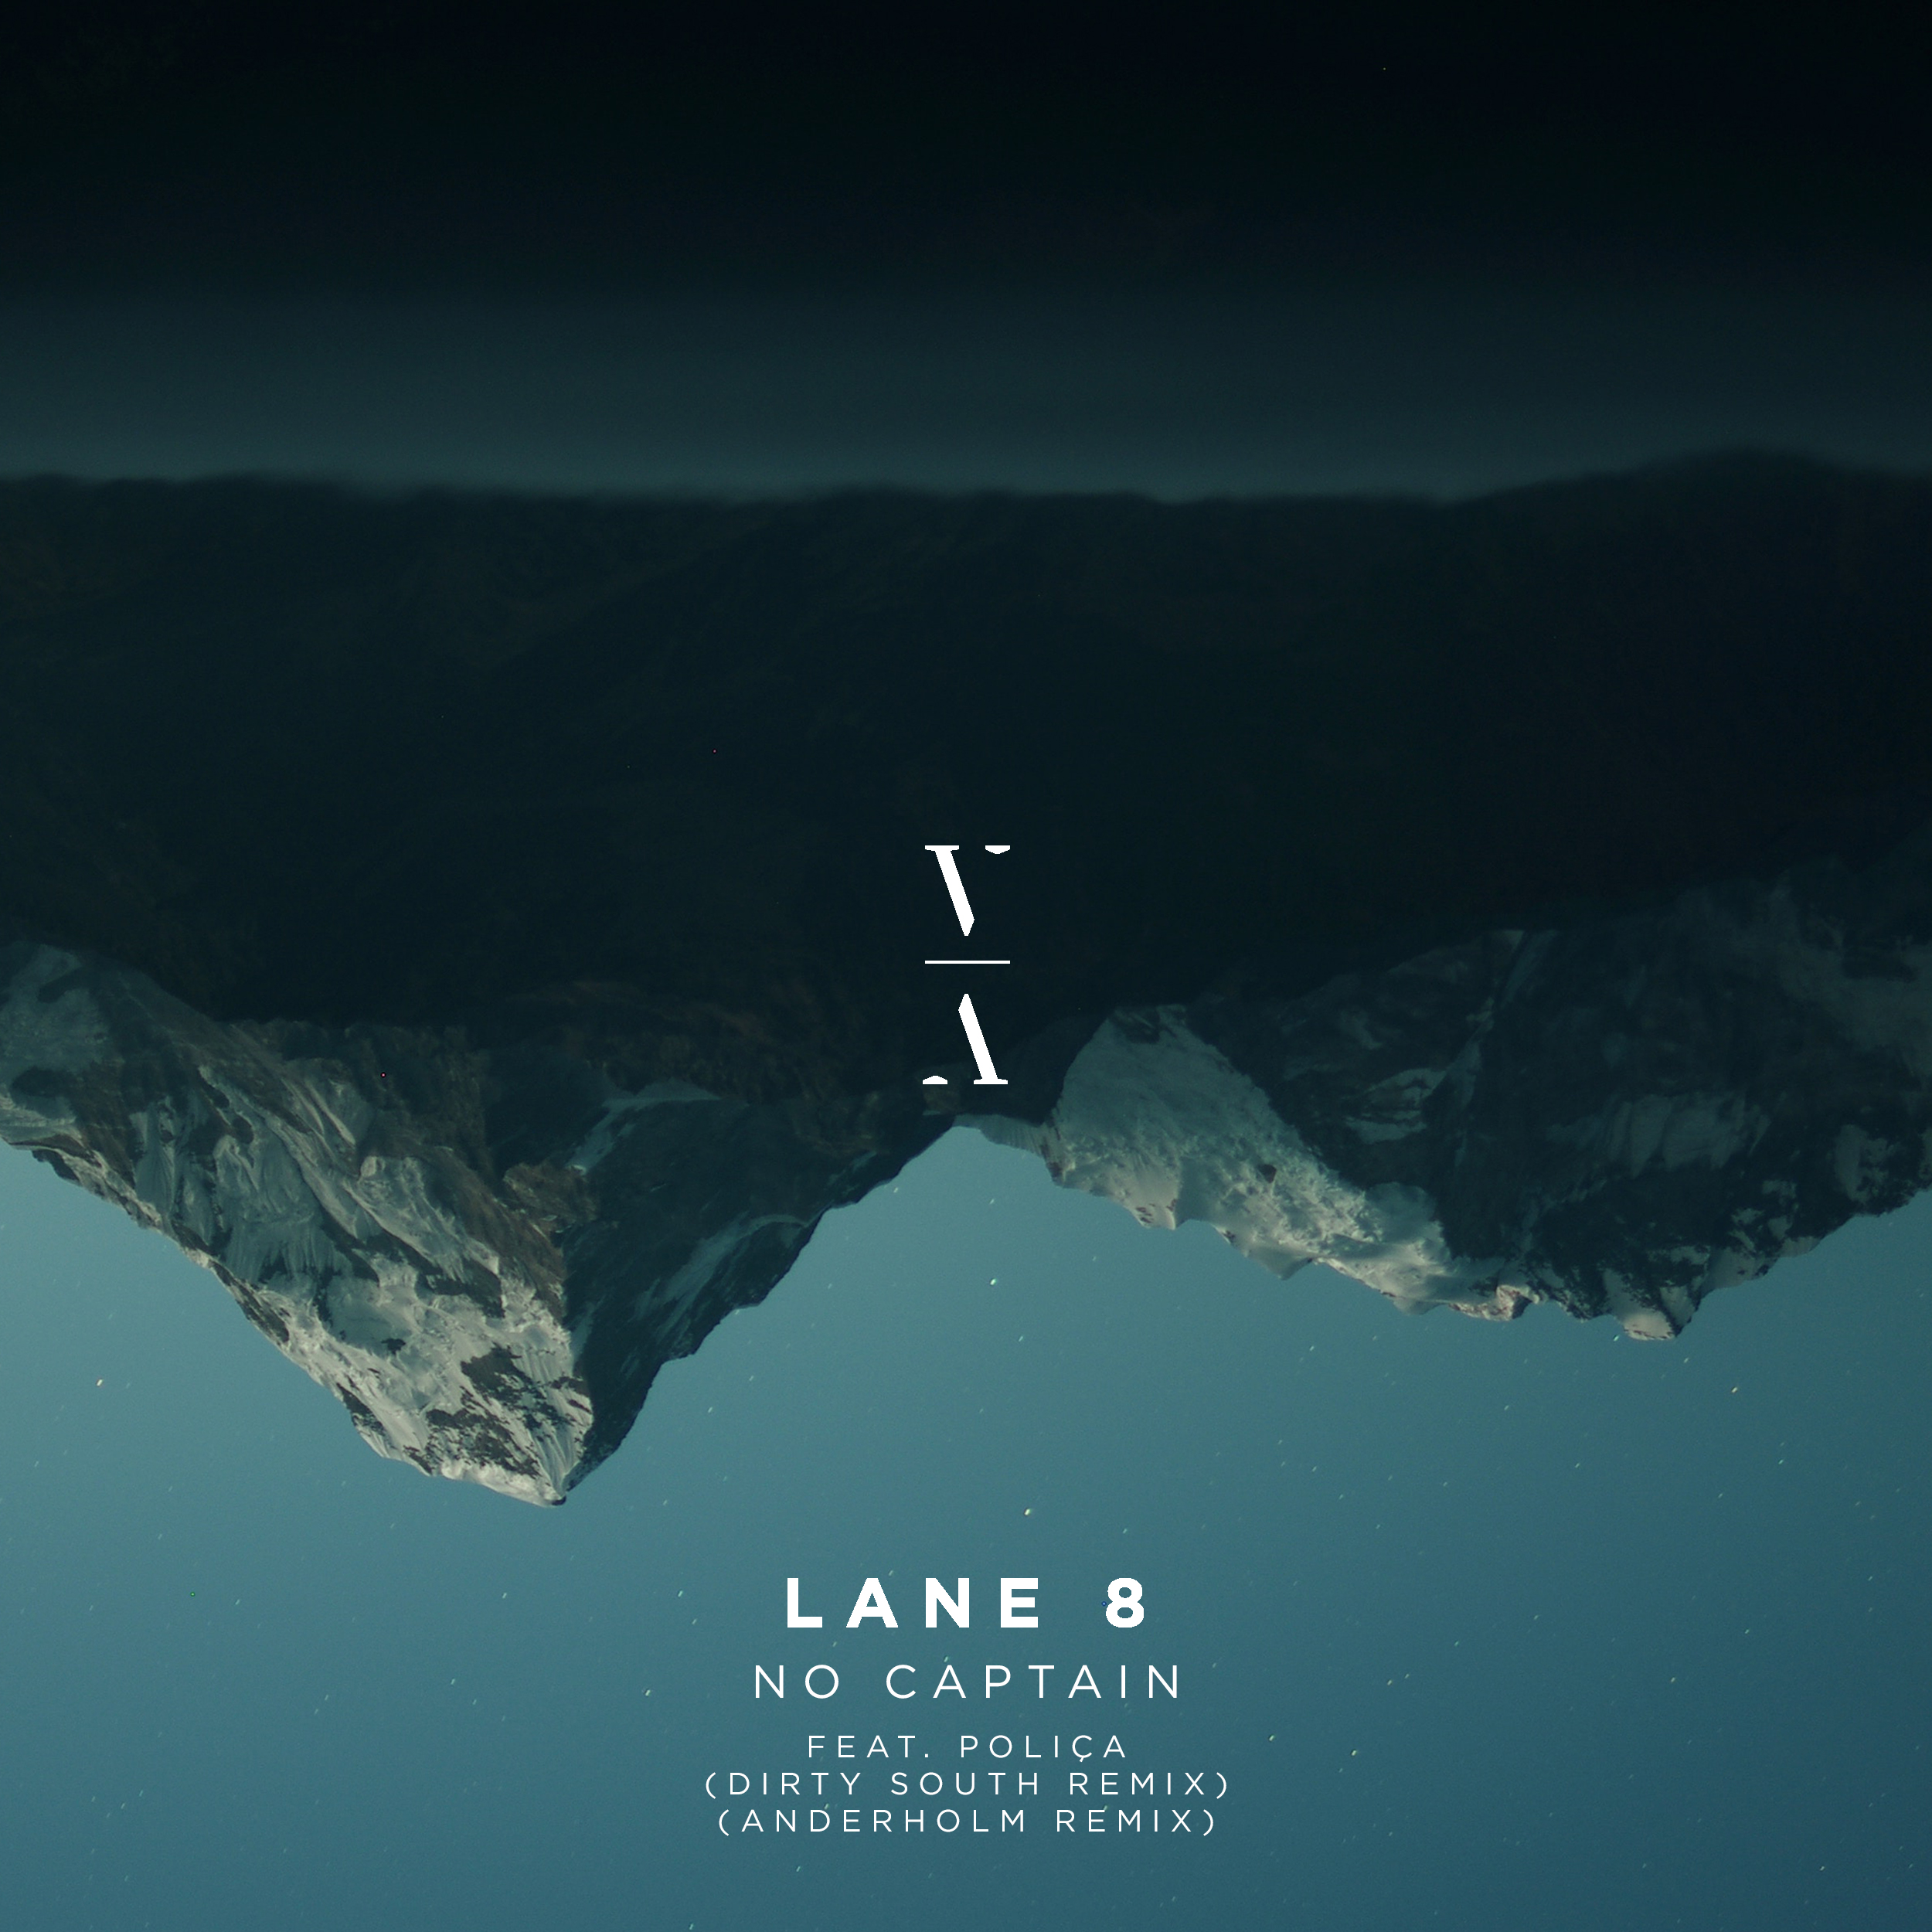 Dirty South’s remix of Lane 8 is stellar, and there are more to come